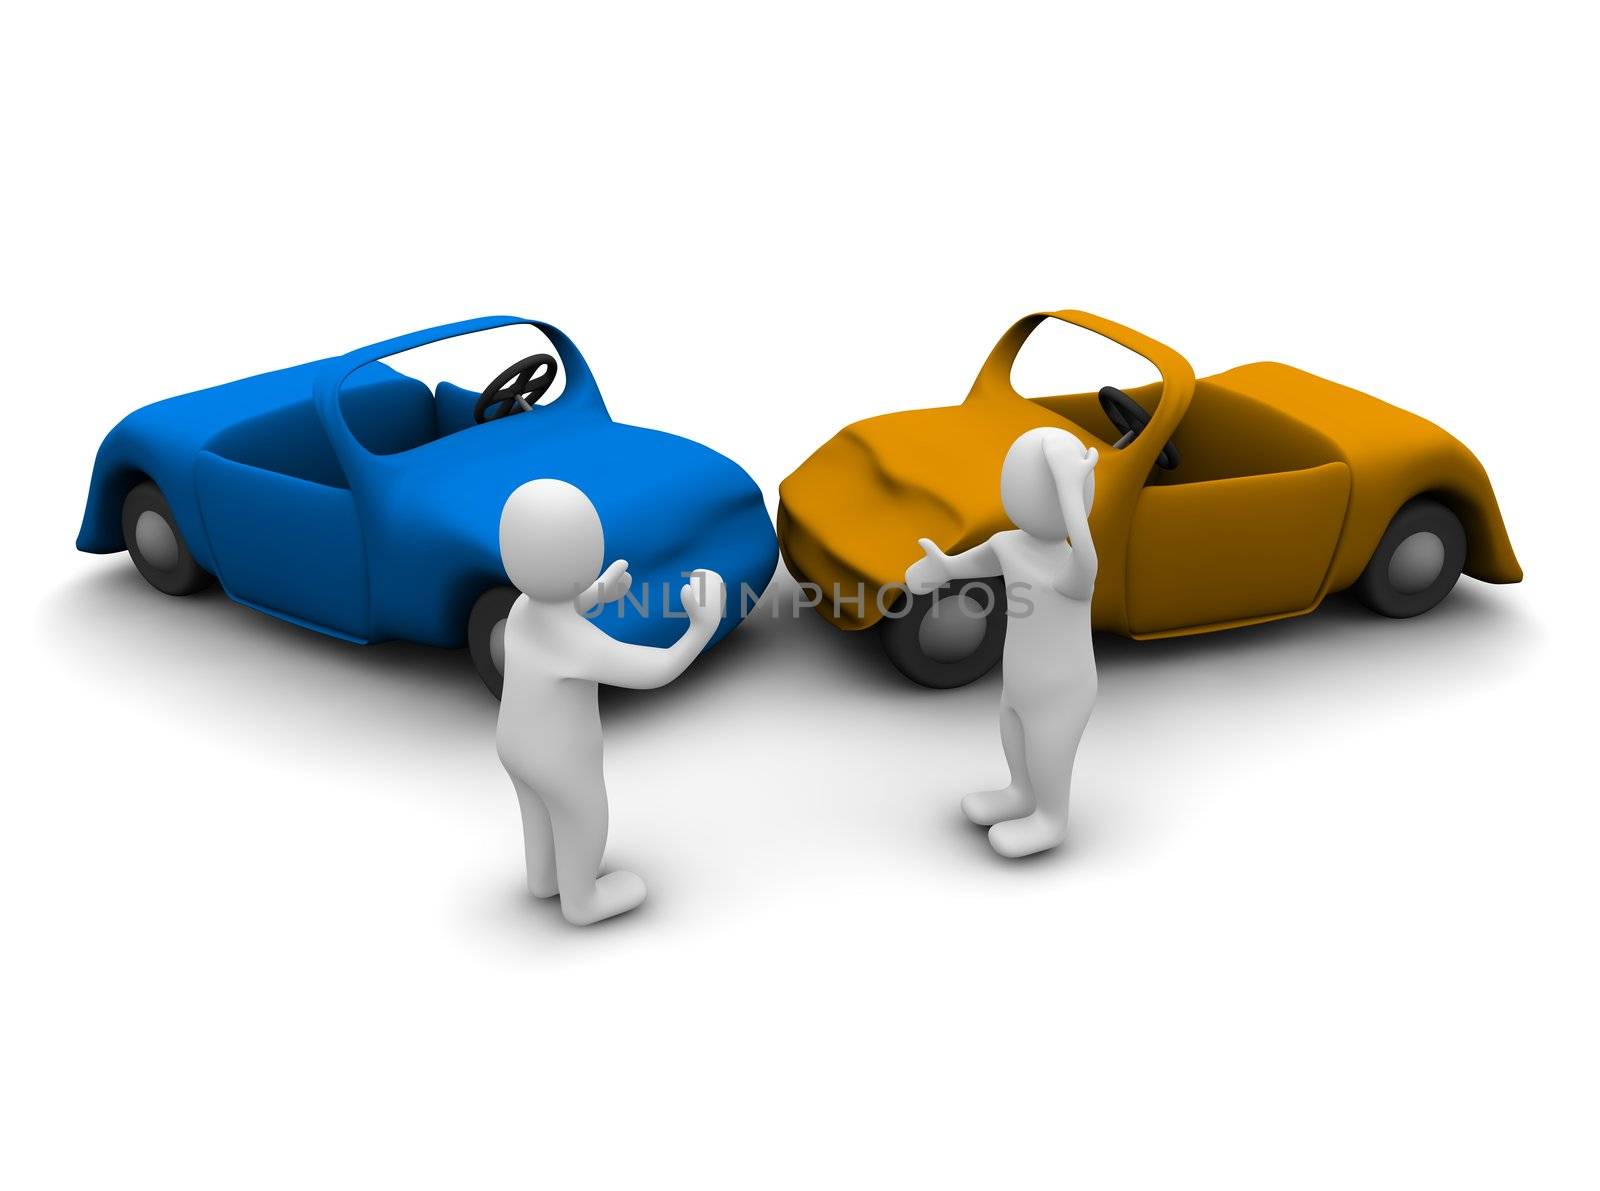 Car accident. 3d rendered illustration isolated on white.